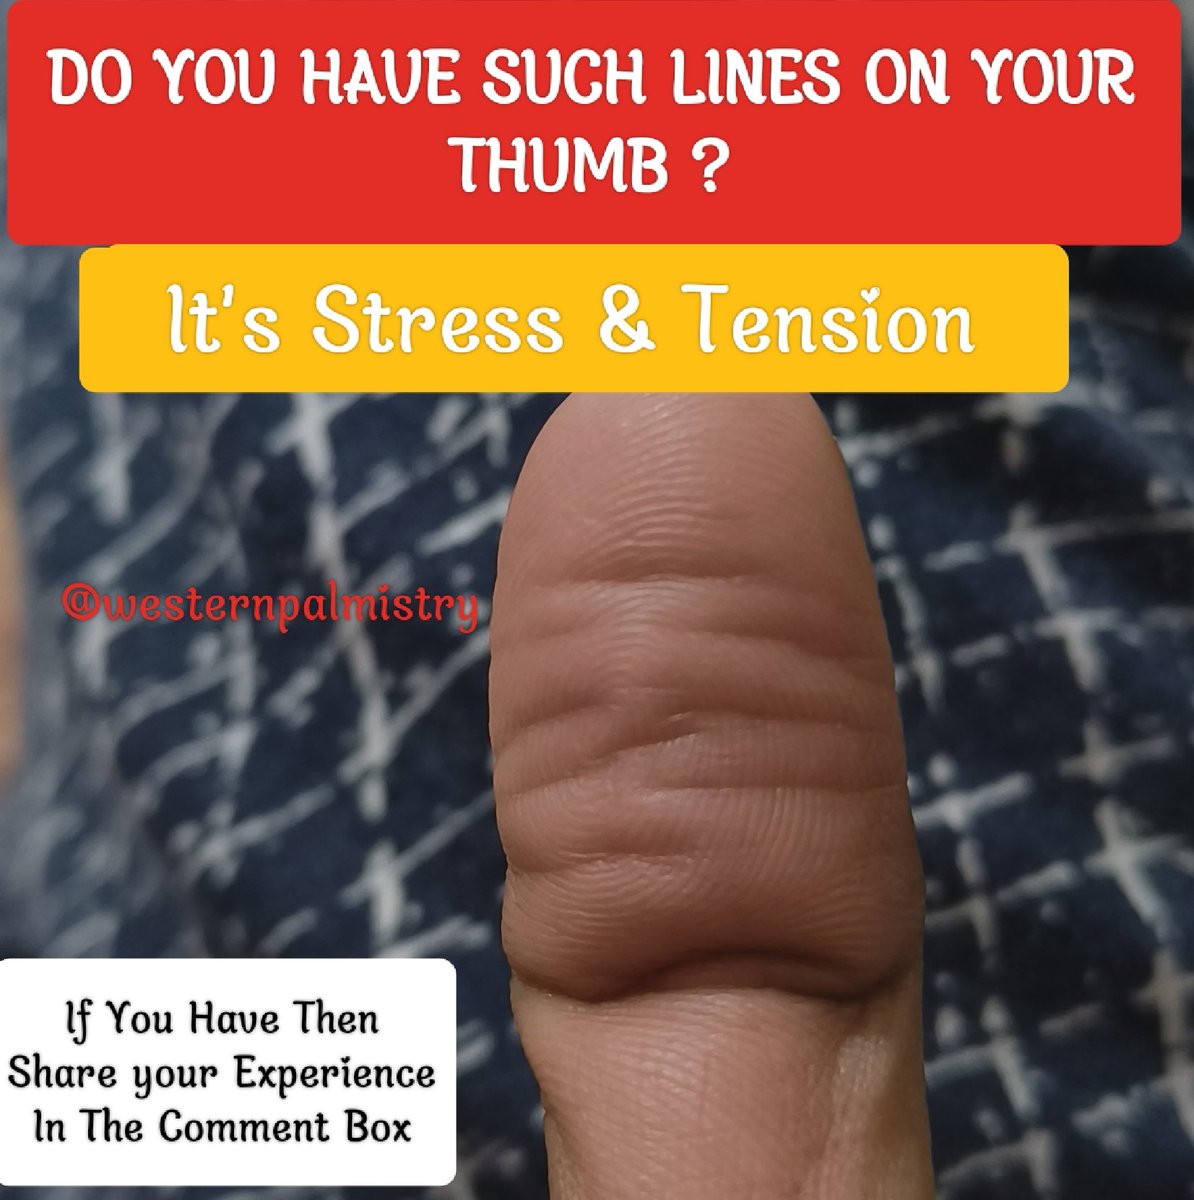 What does your palm say?
#thumb #reading #future #grief #stress #treatment #spirituality #meditation #direction #path #destiny #growth #quotes #reels #post #comment4comment #likesforlike #tag #shareforshare